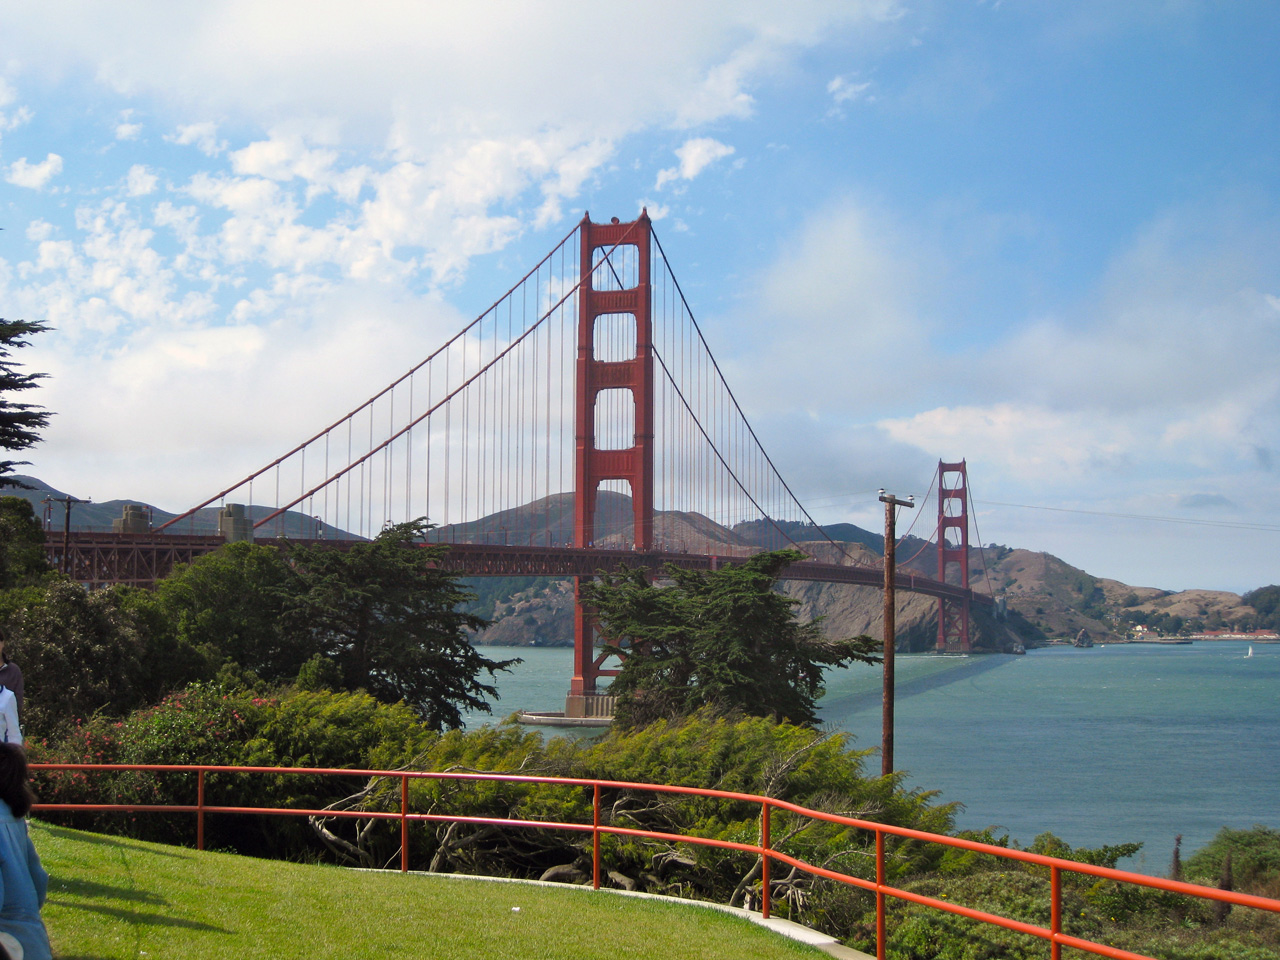 Golden Gate Bridge. San Francisco was warmer than ususal this summer. Photo courtesy Catherine Waterson, EC and E